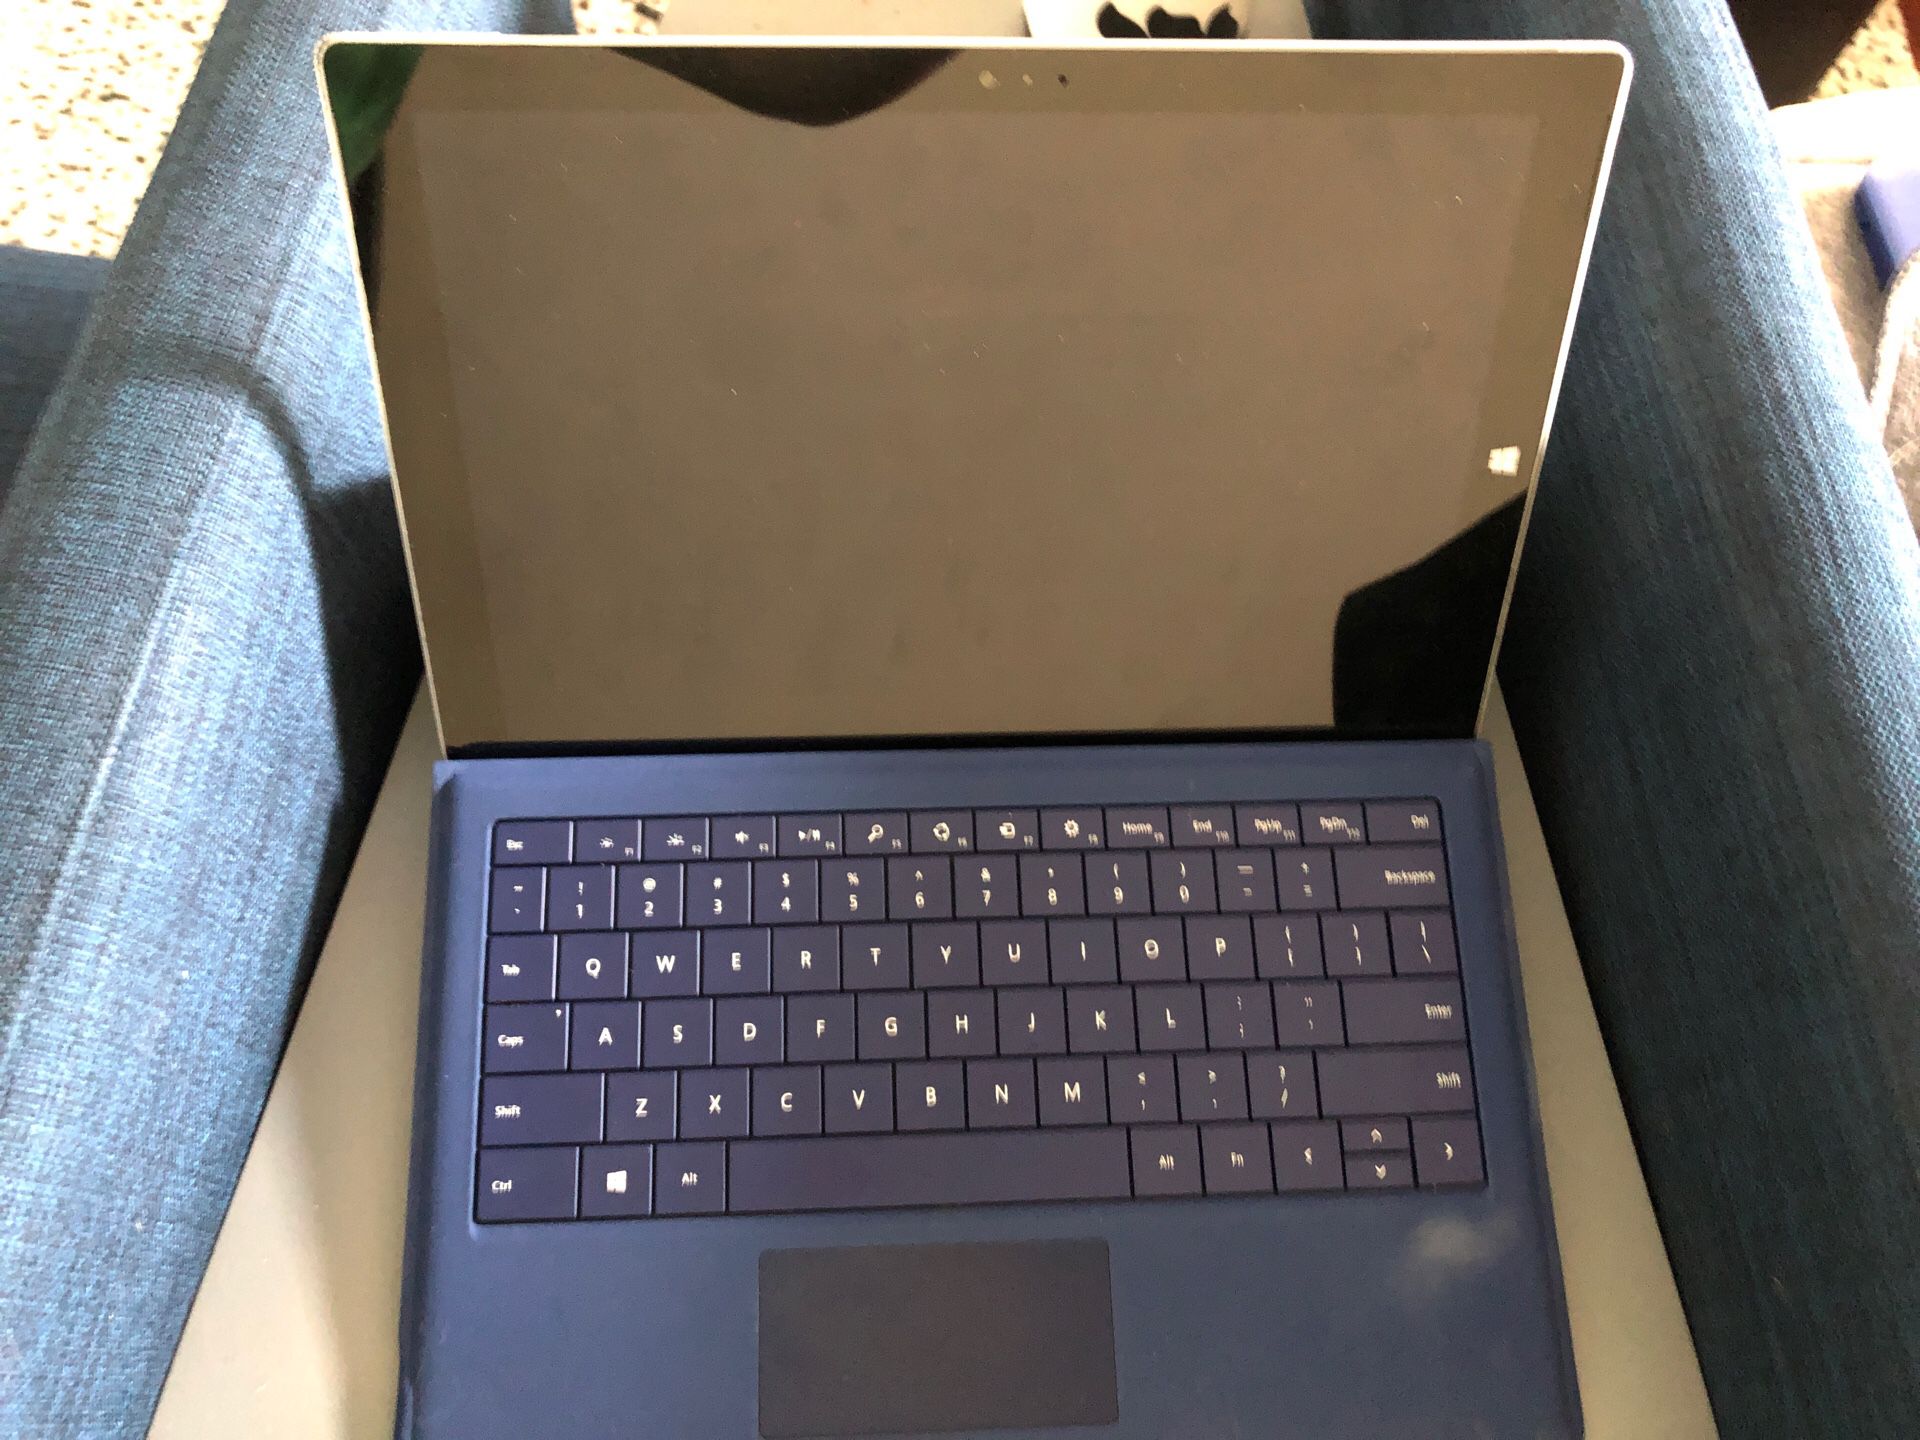 Microsoft Surface 3 with charger and keyboard